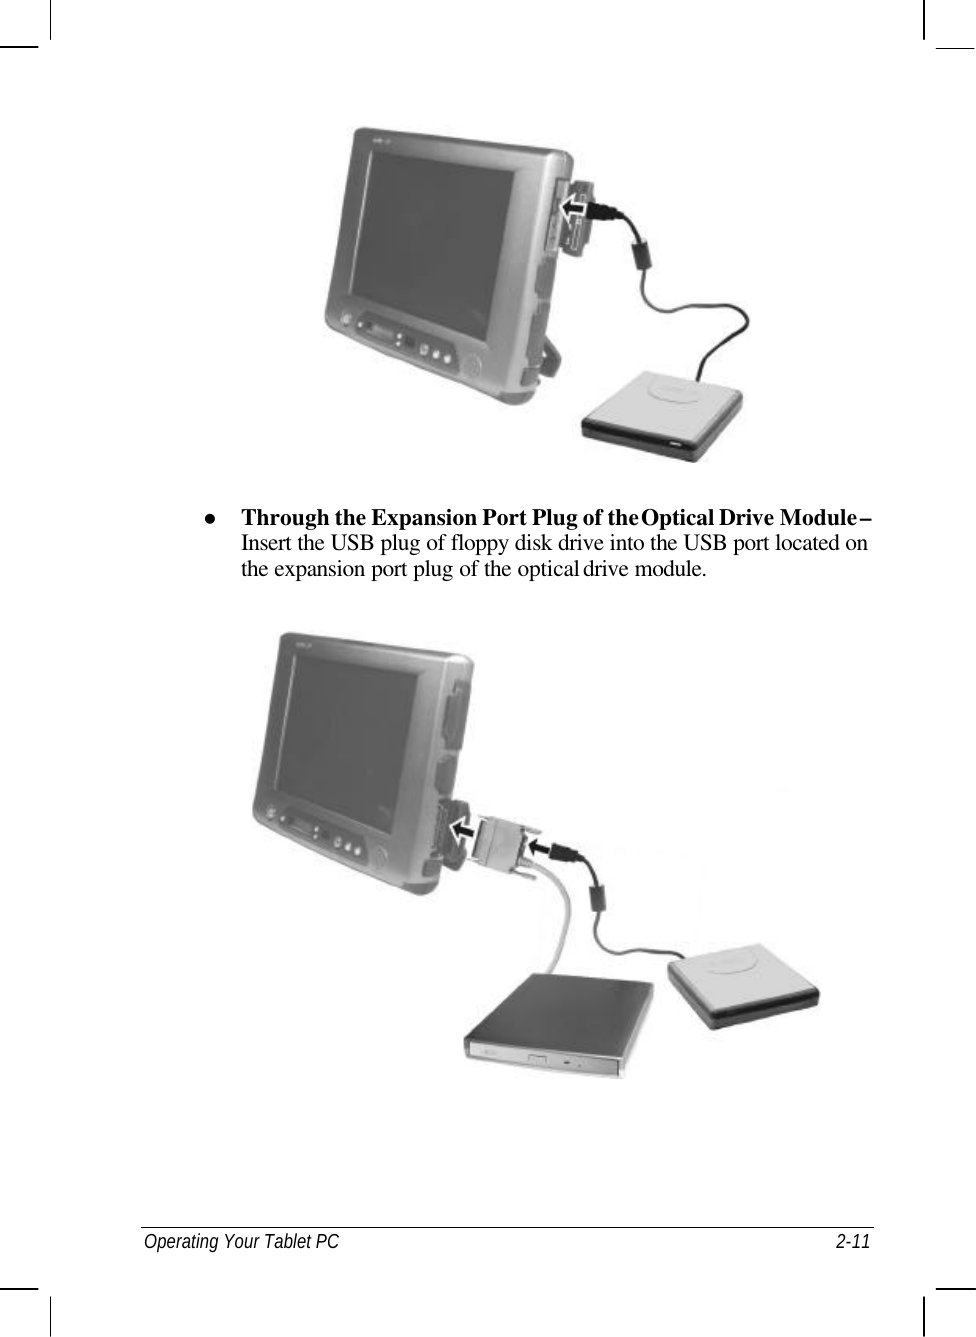  Operating Your Tablet PC 2-11  l Through the Expansion Port Plug of the Optical Drive Module – Insert the USB plug of floppy disk drive into the USB port located on the expansion port plug of the optical drive module.  